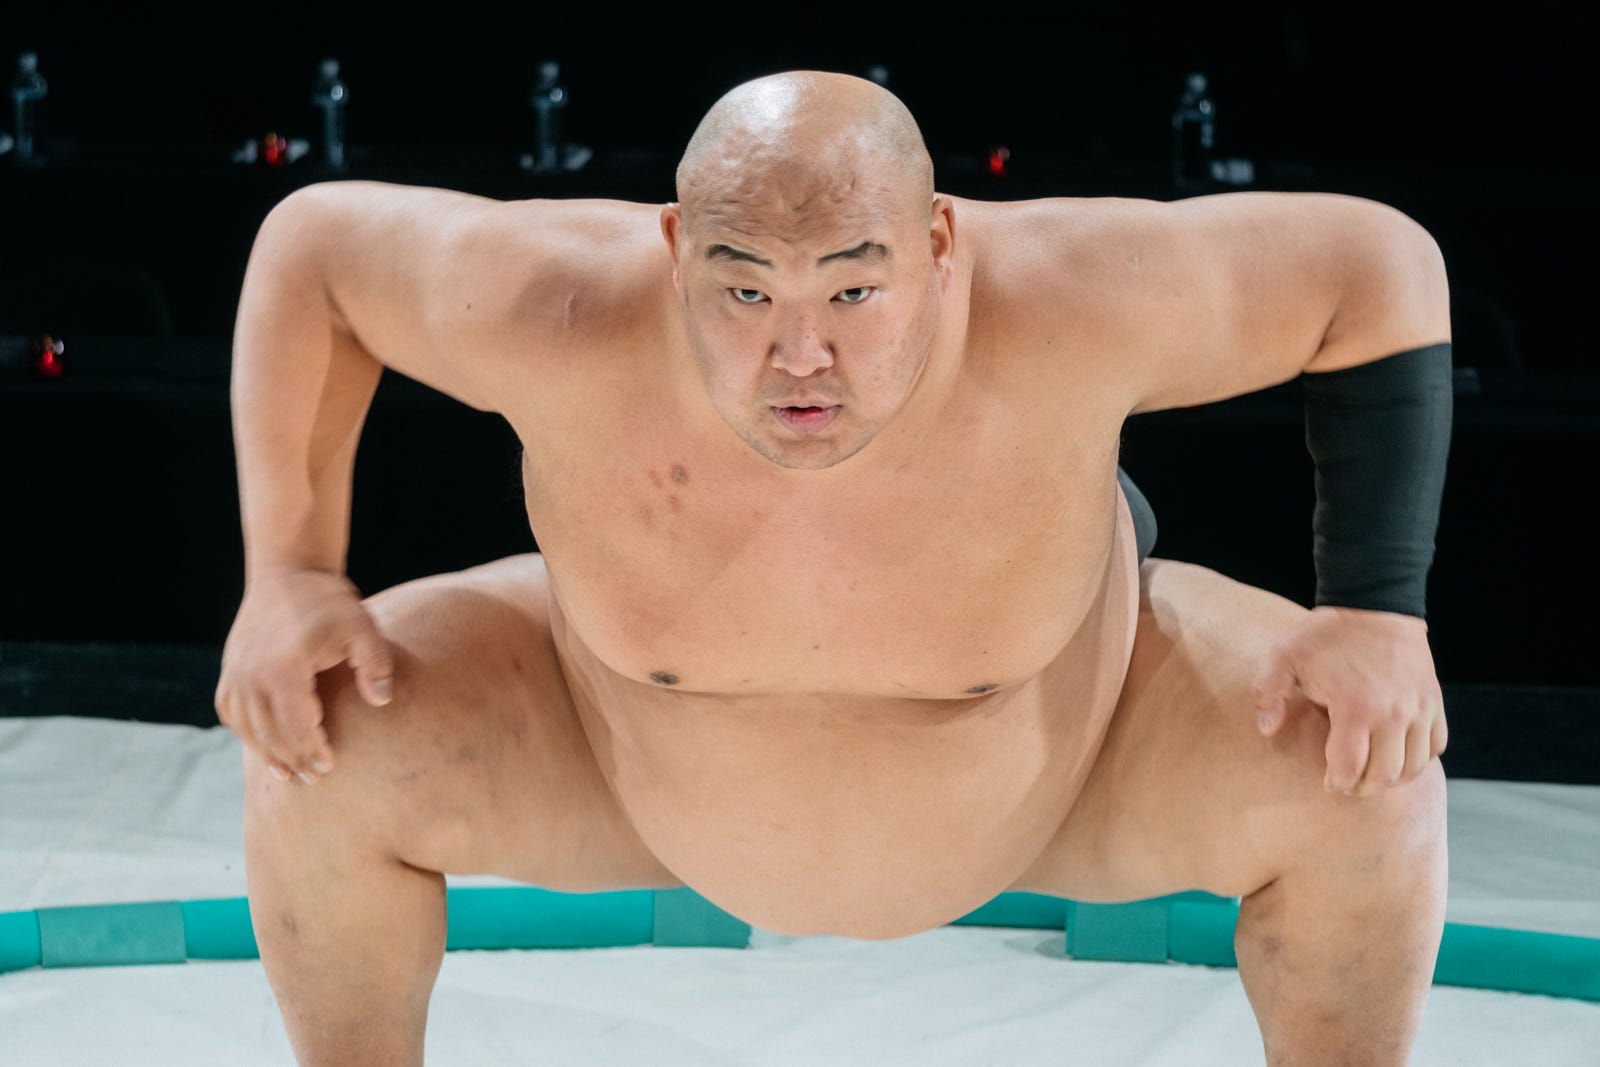 The Structure of Sumo Wrestling